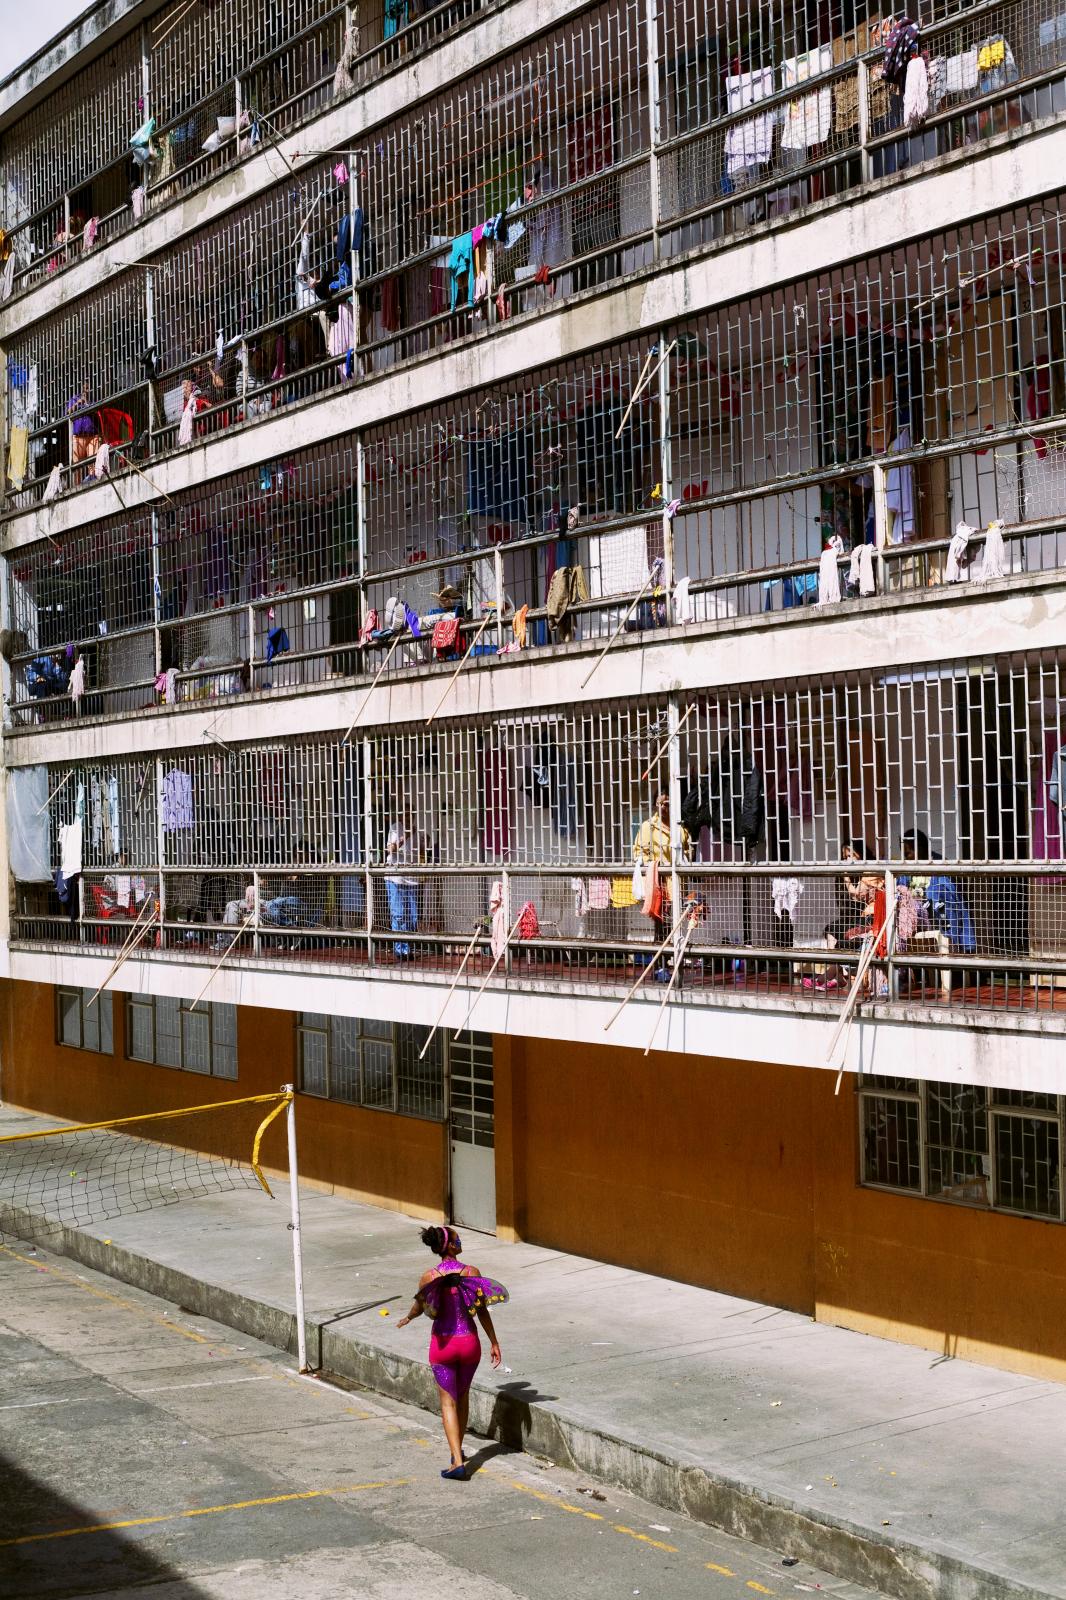 Beauty Contest in "El Buen Pastor" Jail - Bogotá, Colombia. Female inmates of the jail...